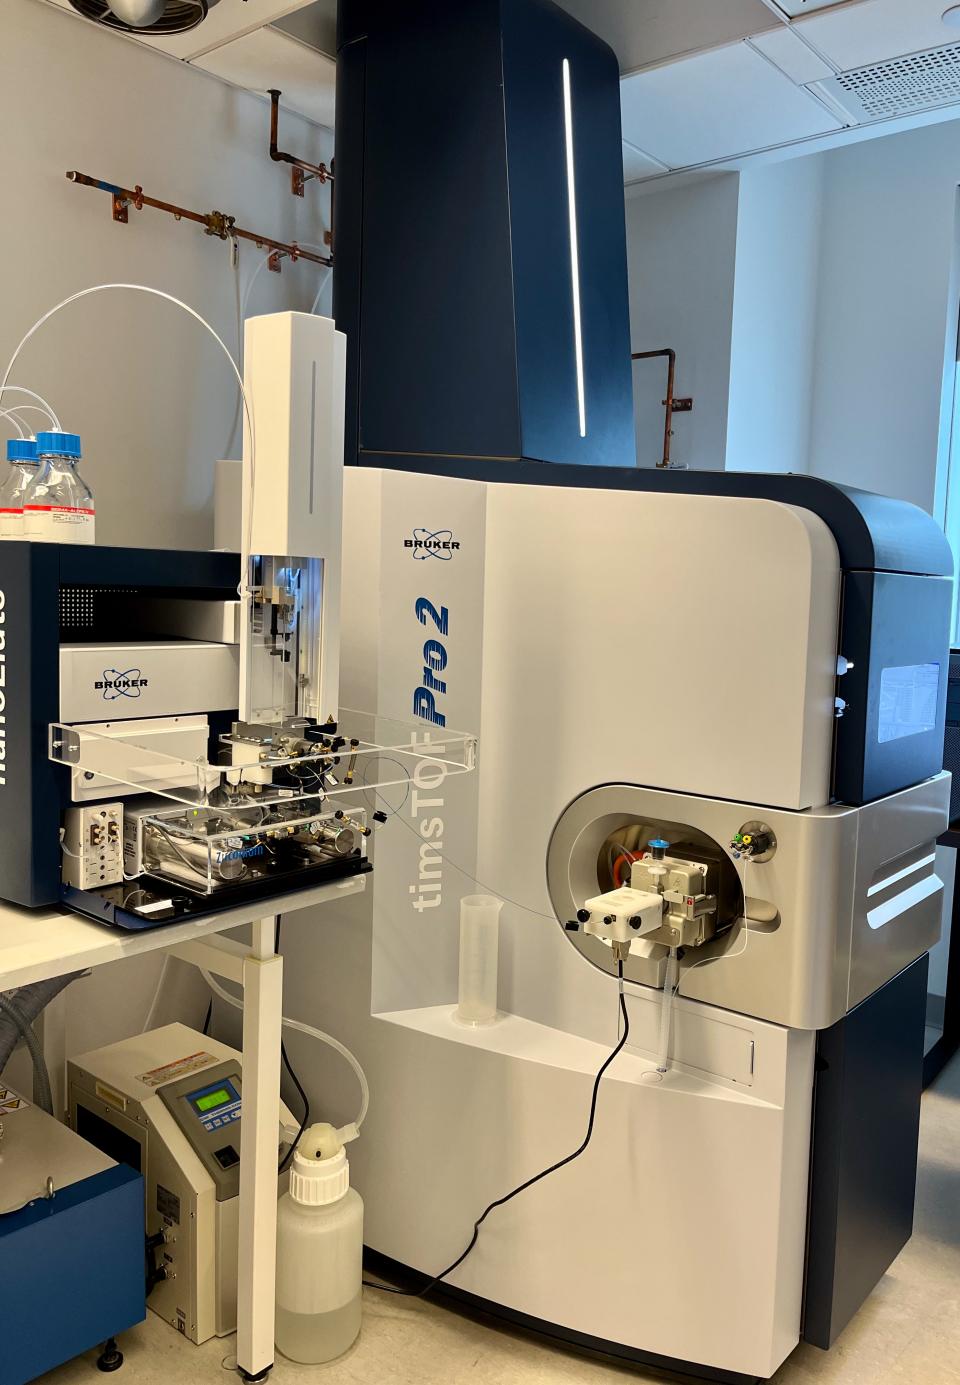 We recently received a new Bruker timsTOF Pro 2